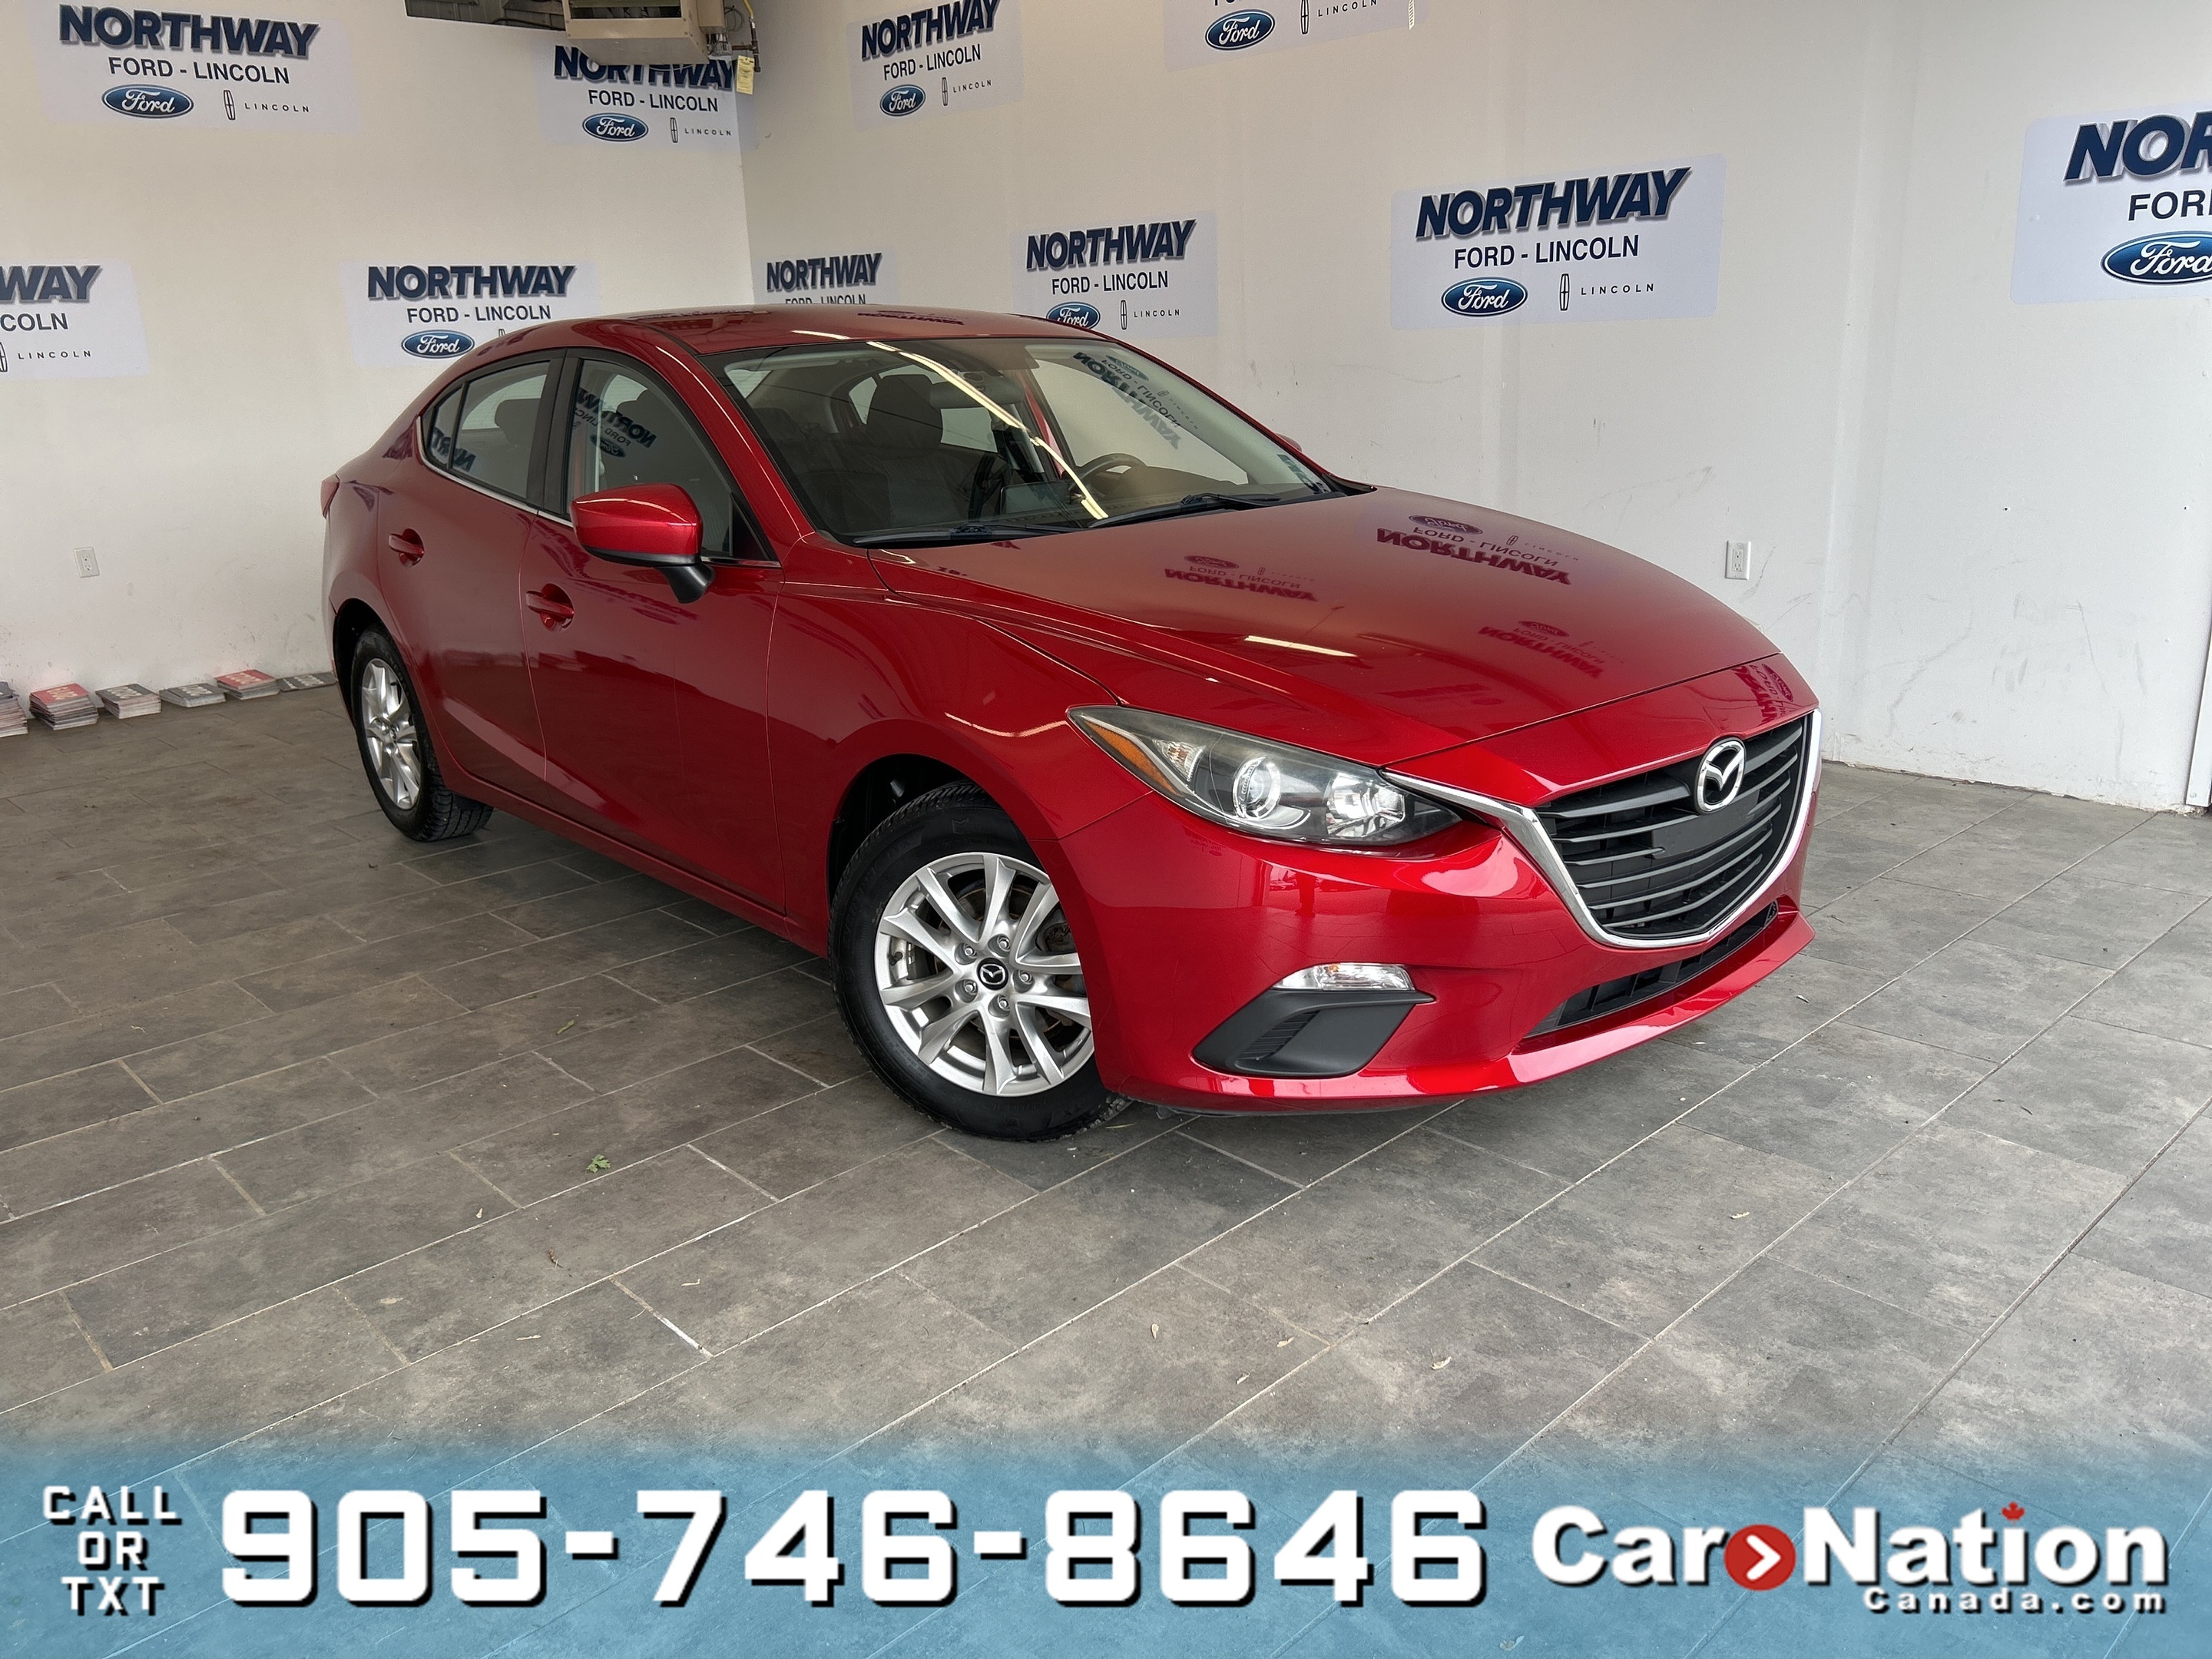 2014 Mazda Mazda3 GS | TOUCHSCREEN |REAR CAM | LOW KMS |OPEN SUNDAYS